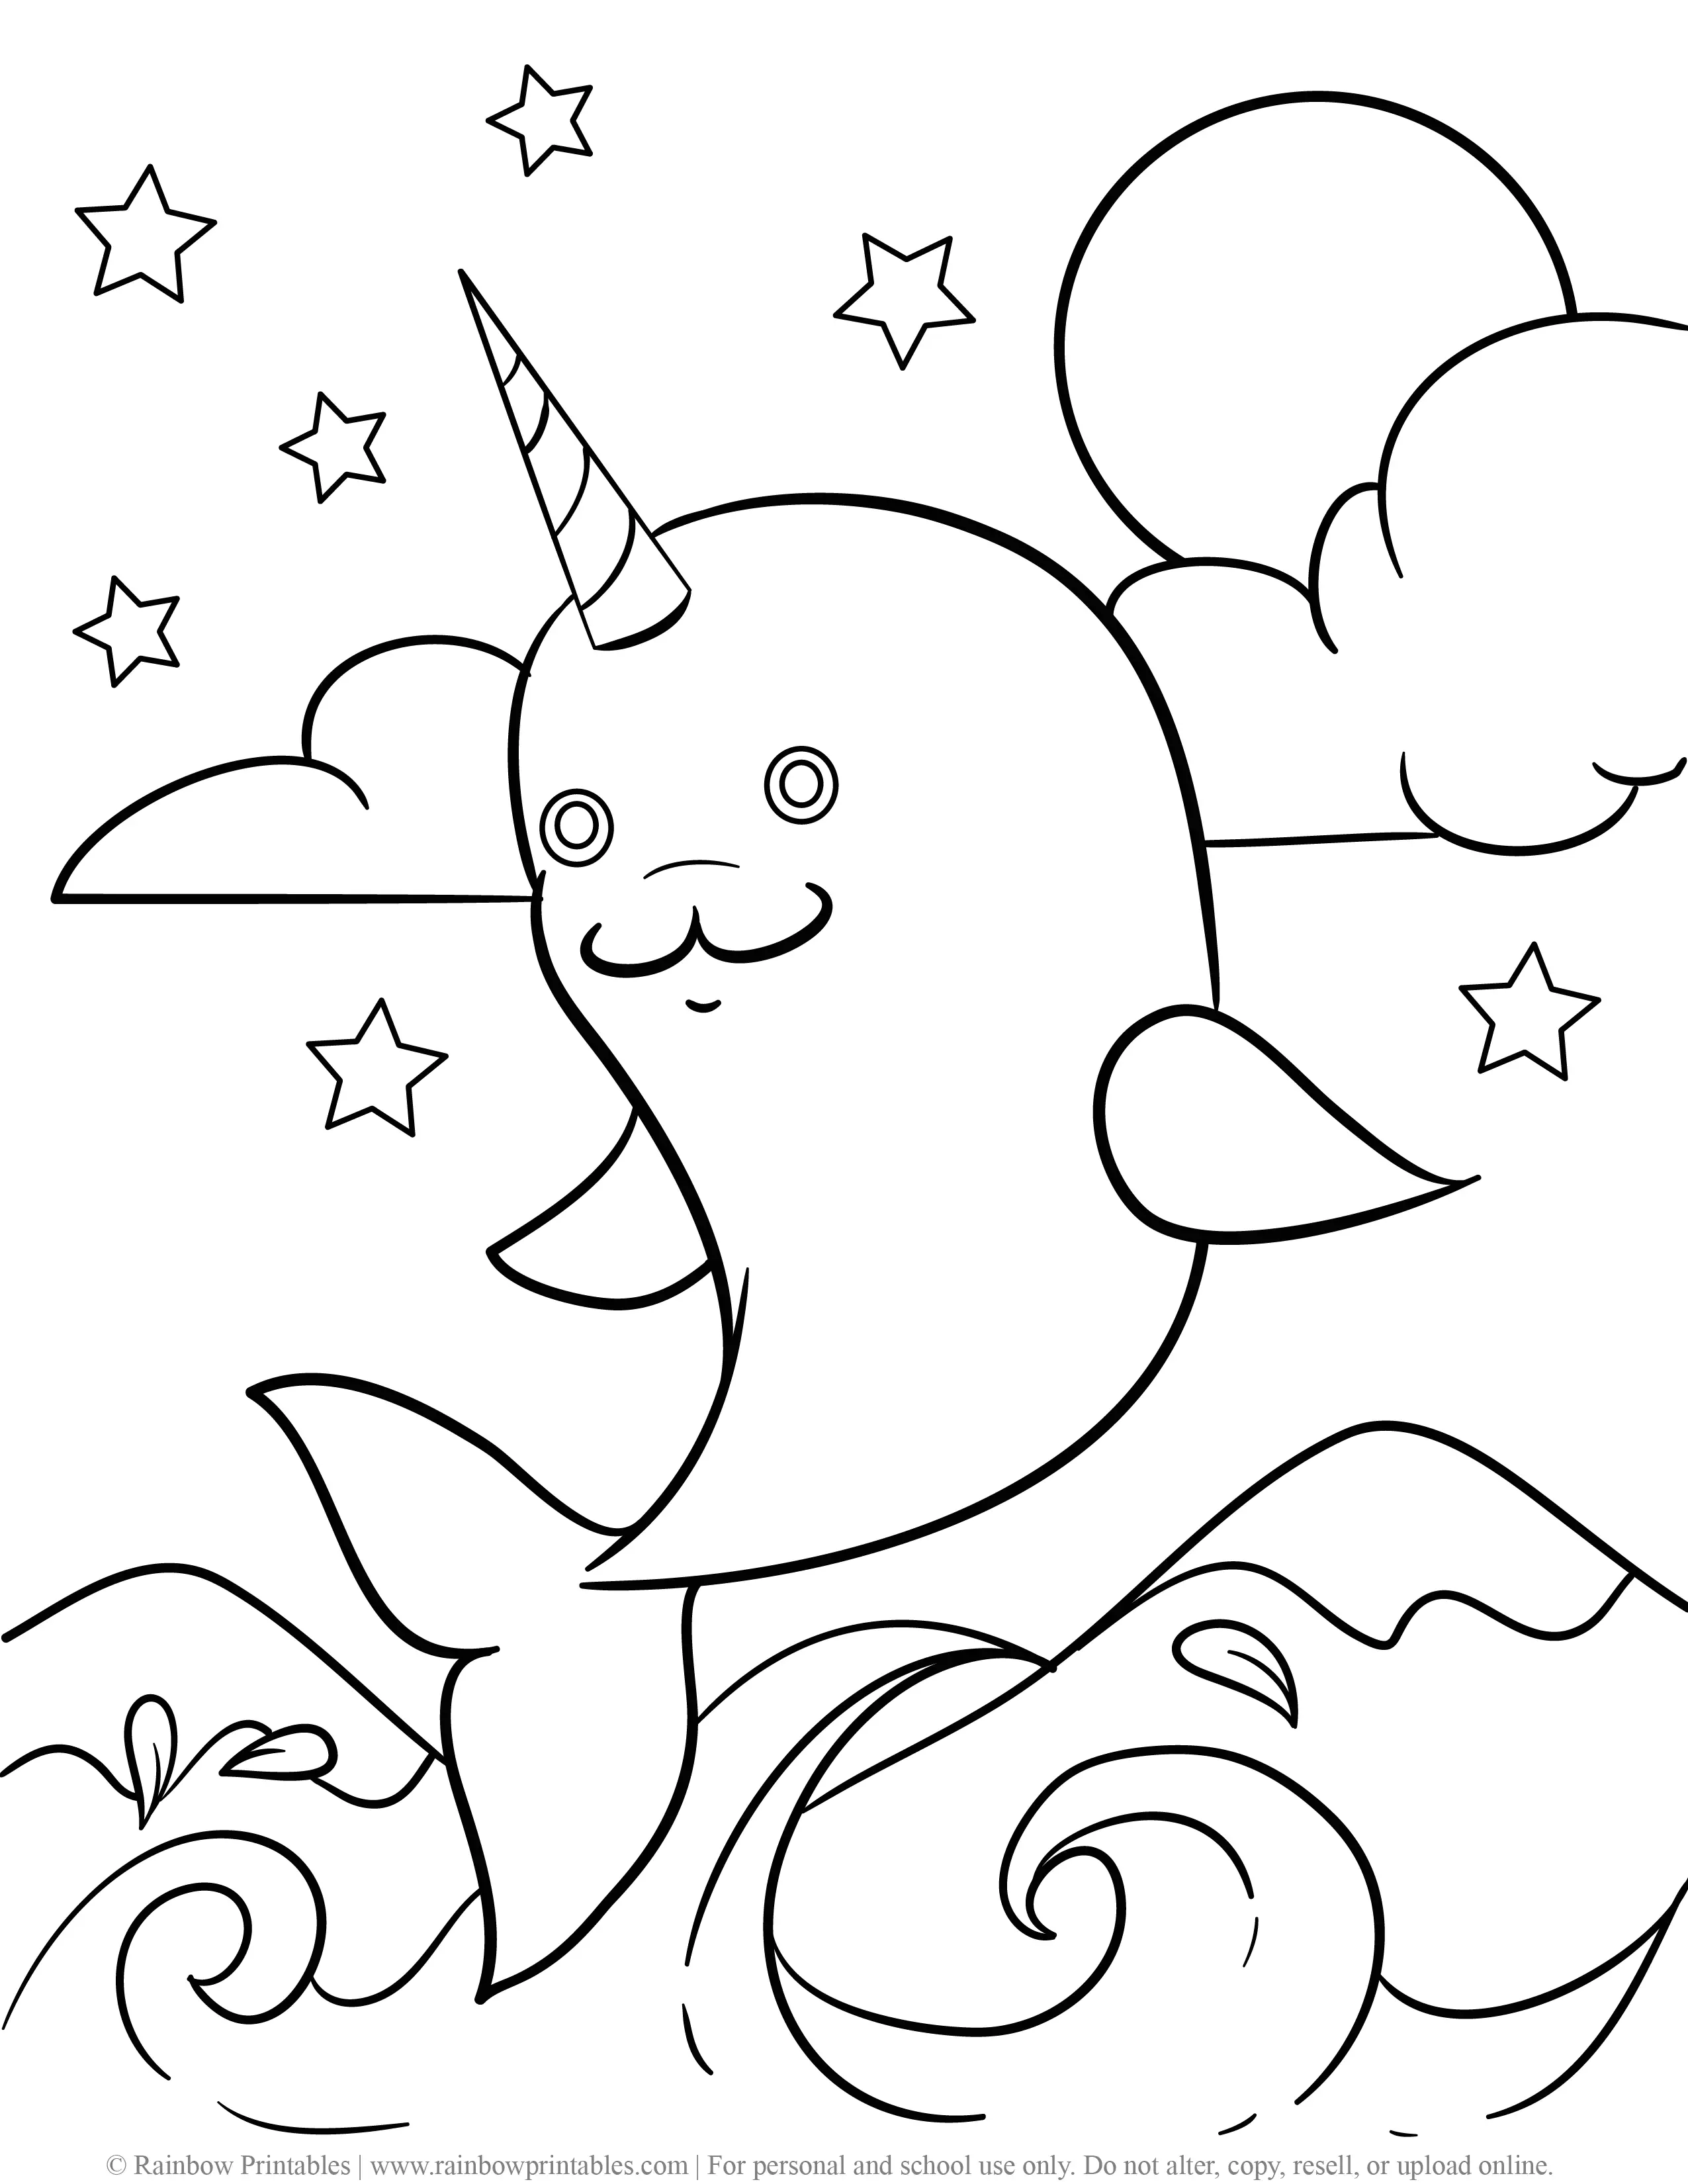 Narwhals Coloring Pages   Rainbow Printables